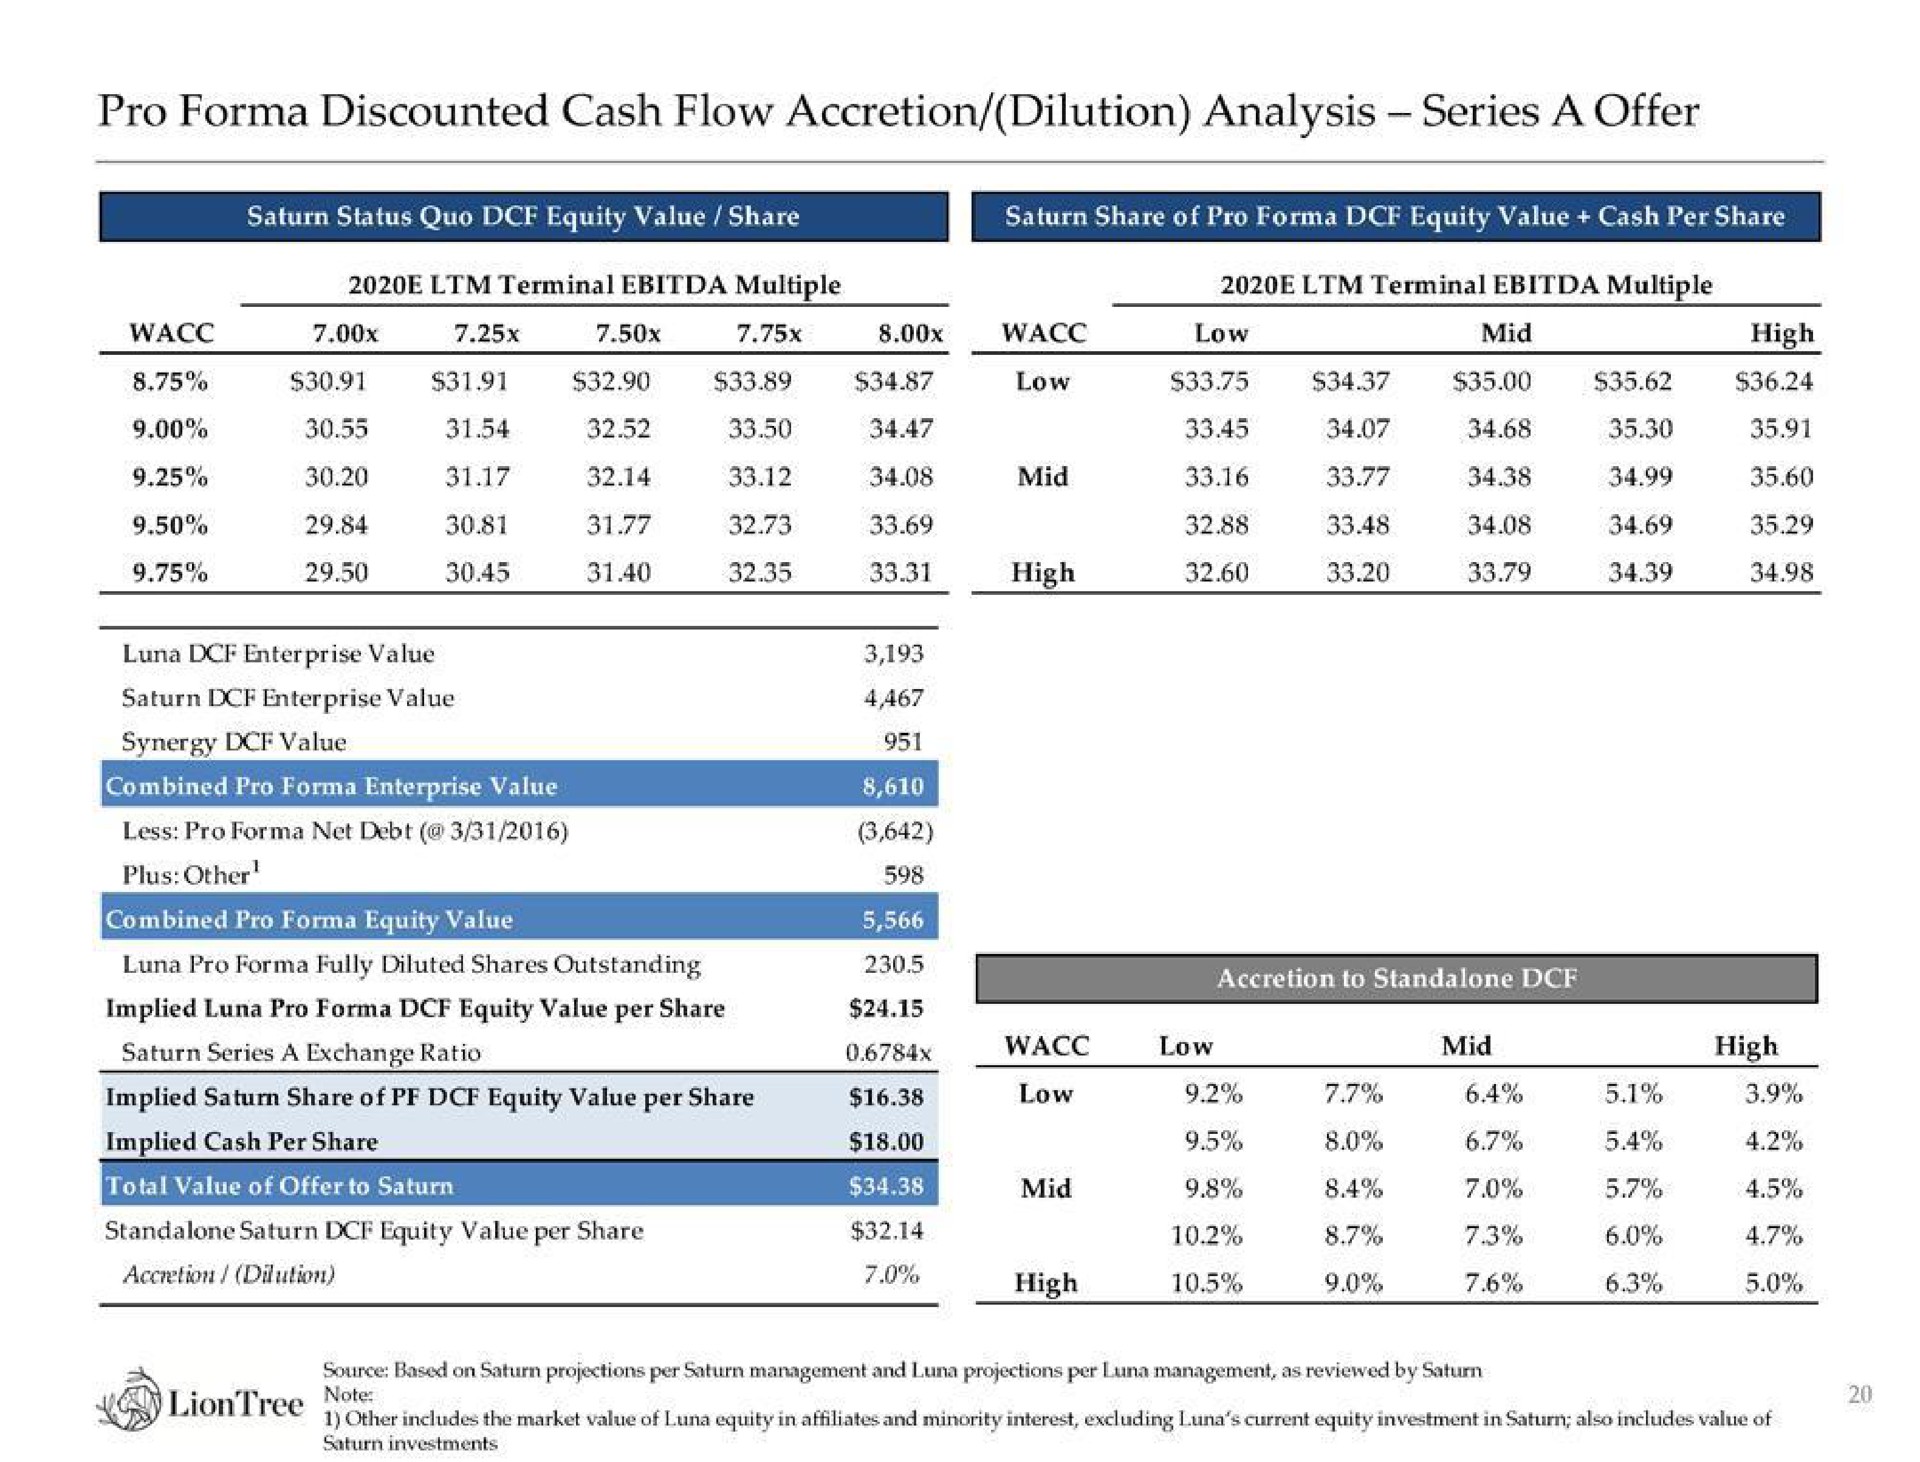 pro discounted cash flow accretion dilution analysis series a offer plus other series a exchange ratio implied share of equity value per share low low mid mid high | LionTree